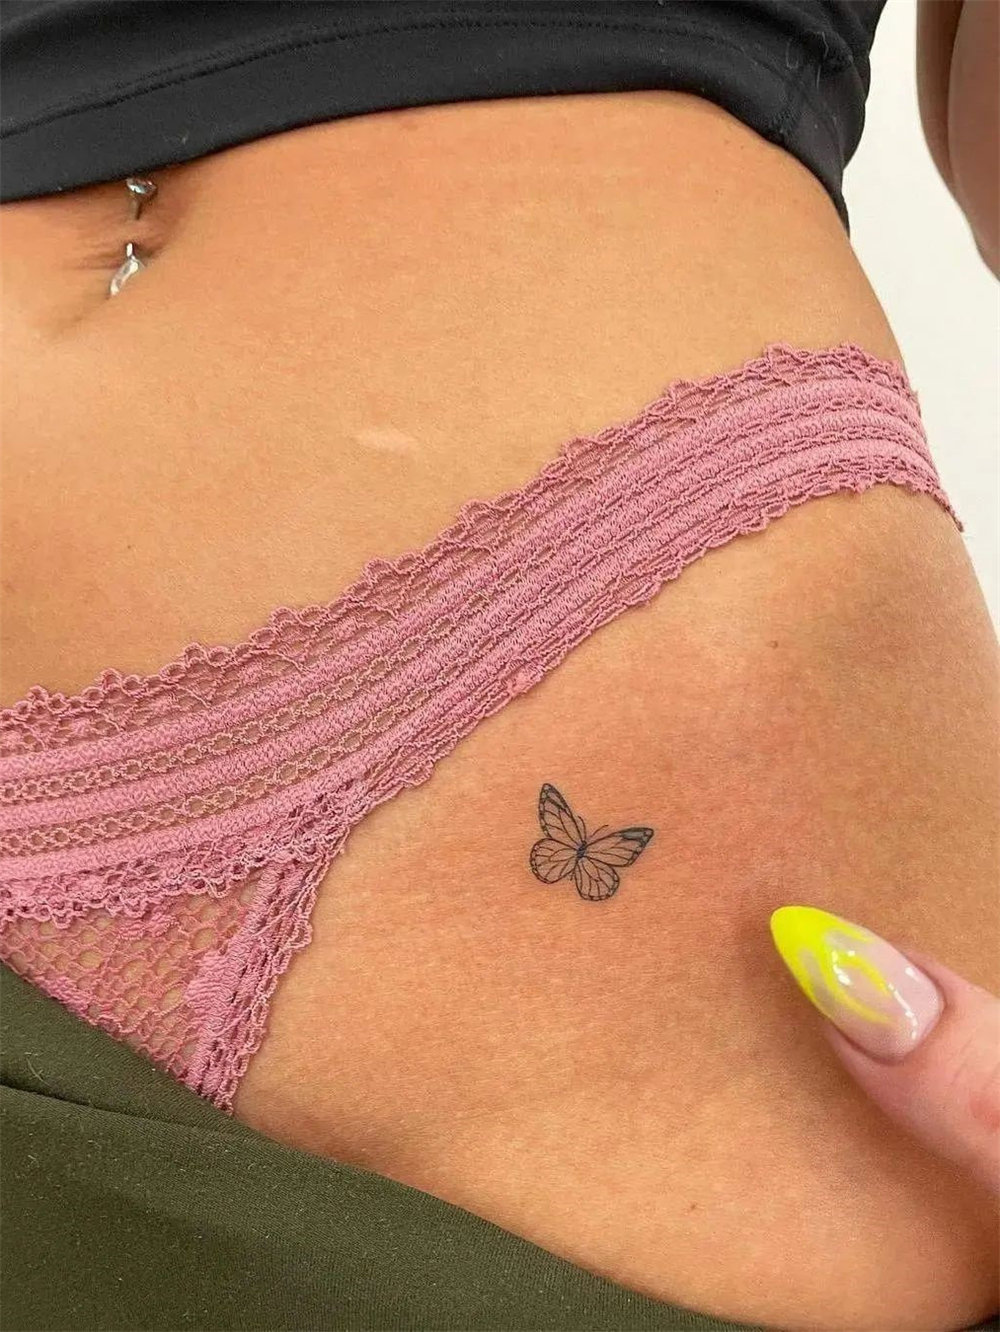 35 Small Tattoos With Big Meanings for Women